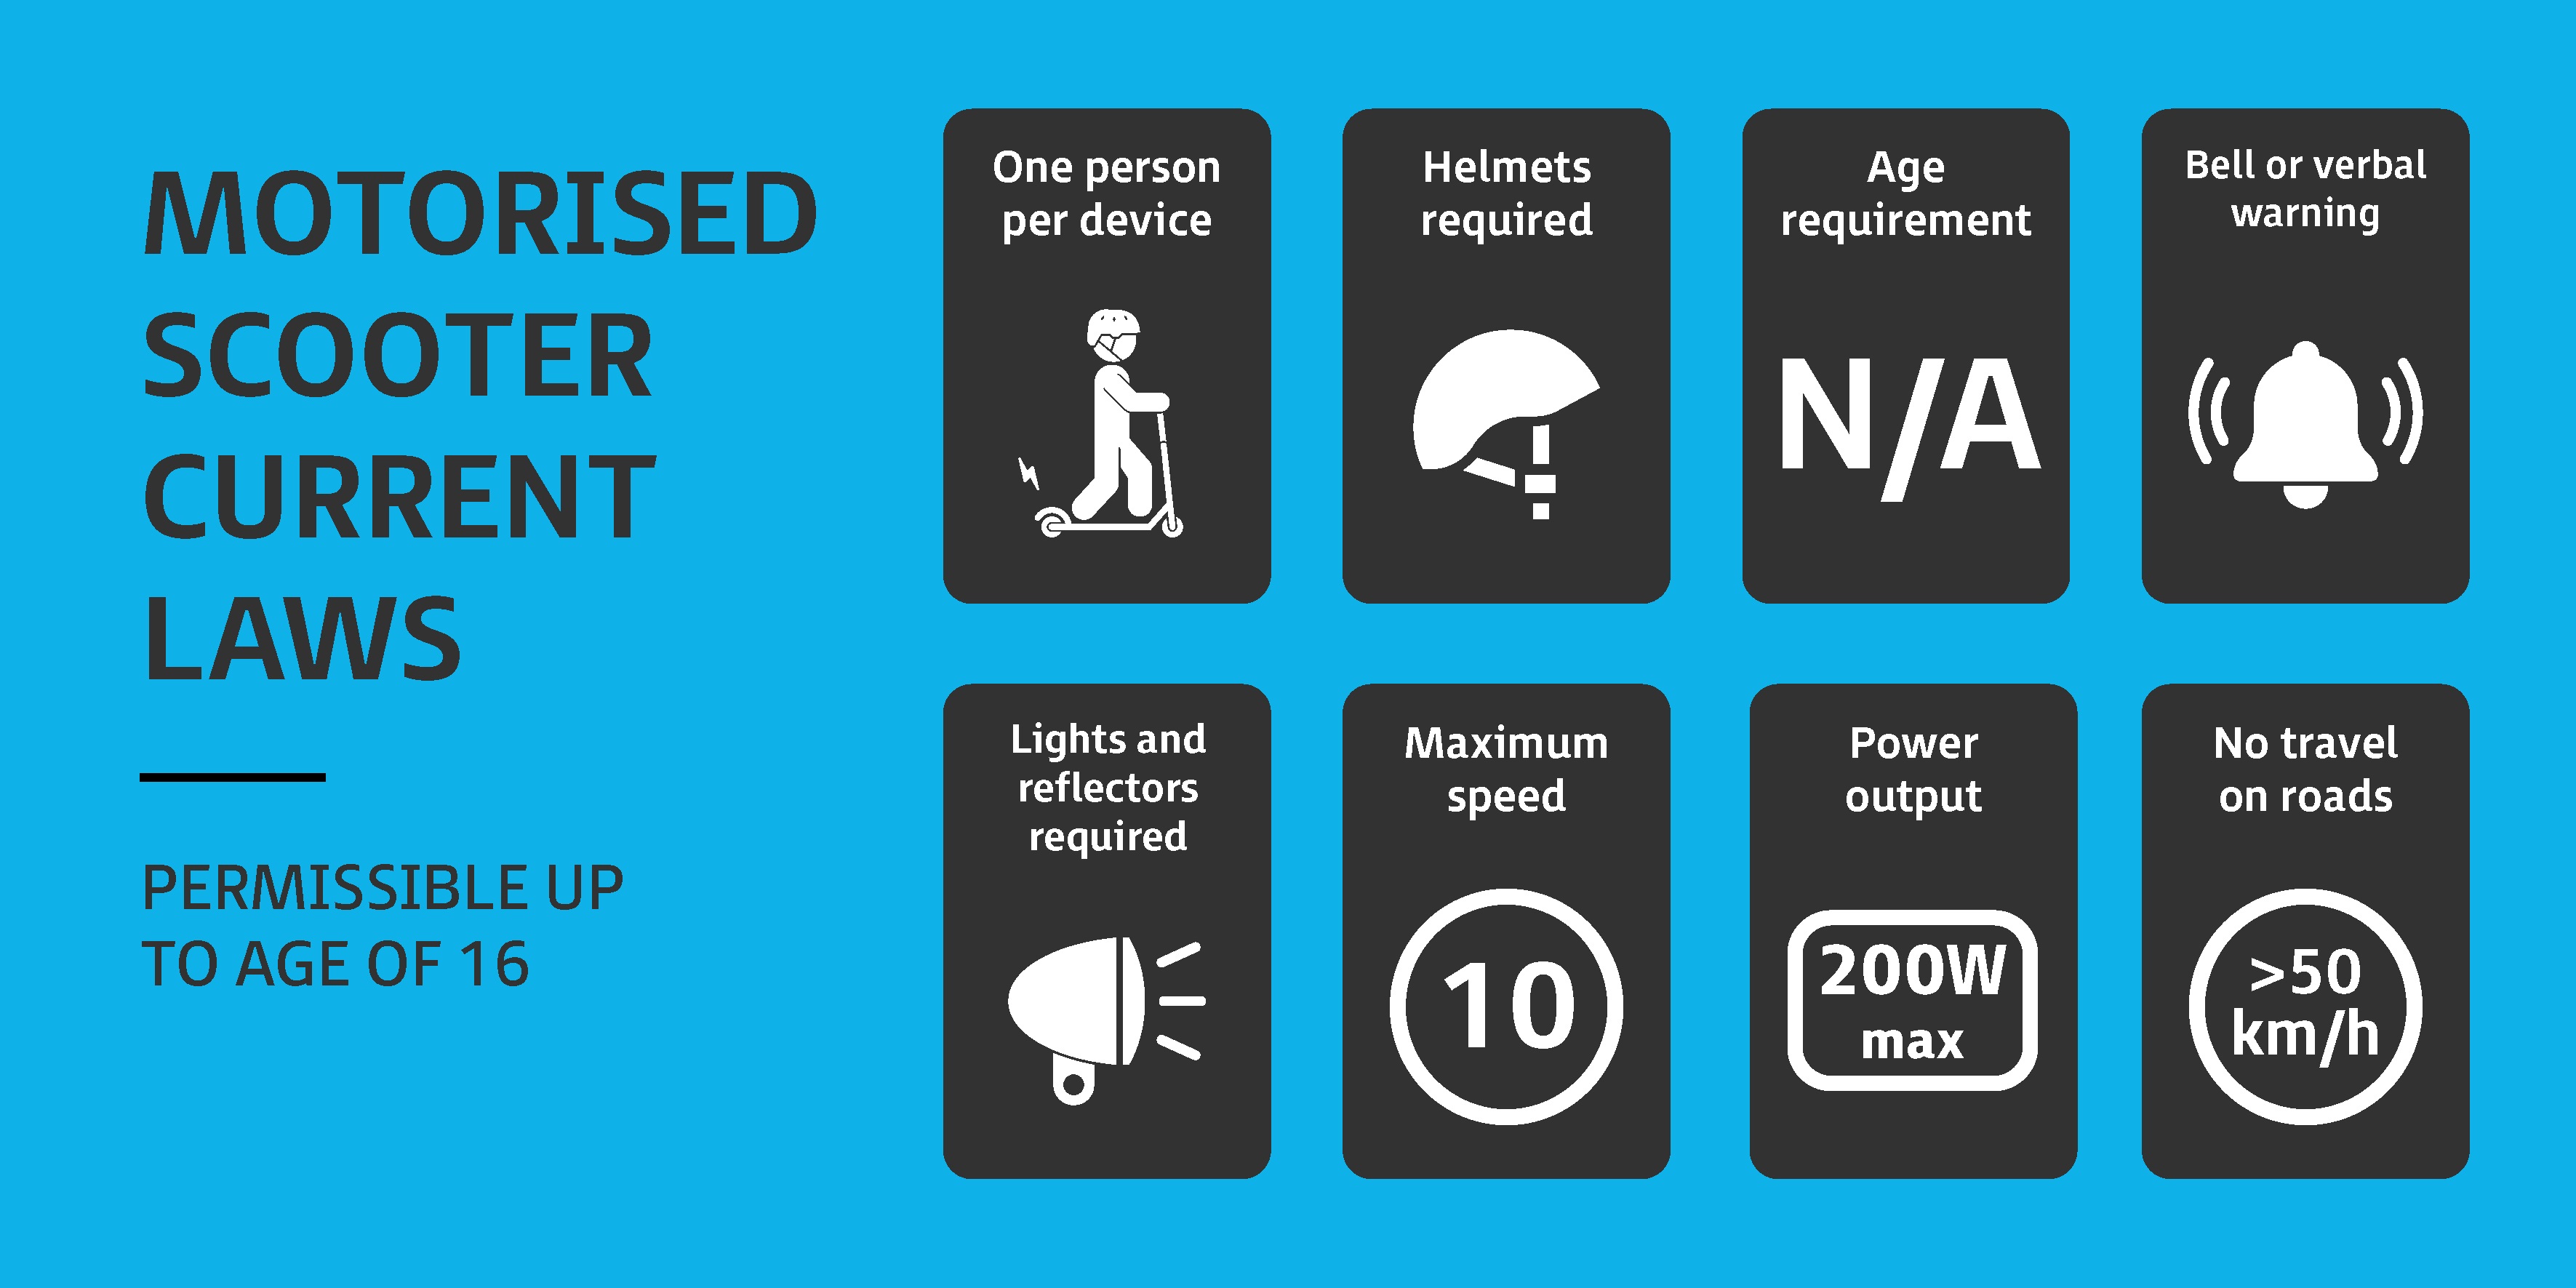 One person per device and helmets required on motorised scooters